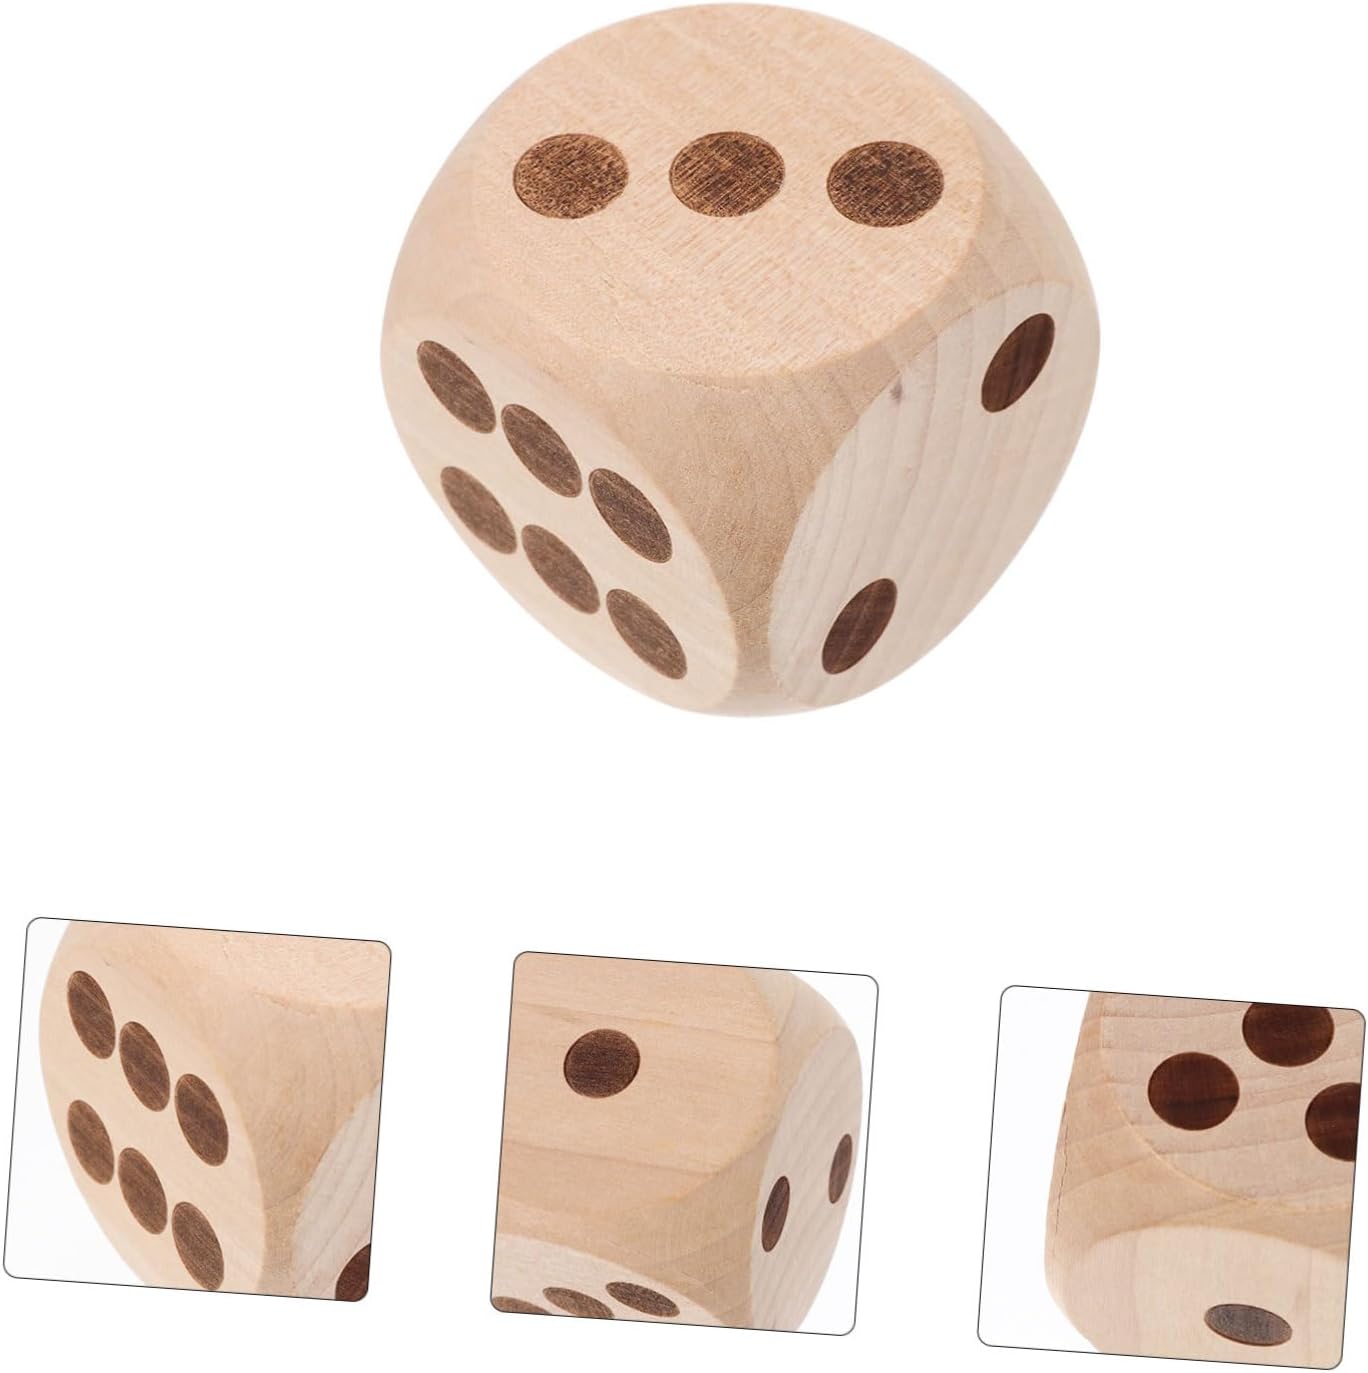 3pcs Large Solid Wood Dice Arts and Crafts Kit Dice for Kids Wooden Dice DIY Blank Dice Natural Wooden Dice Craft Wood Blocks Game Dice Multi-use Wood Dice Portable Wood Dice Wood